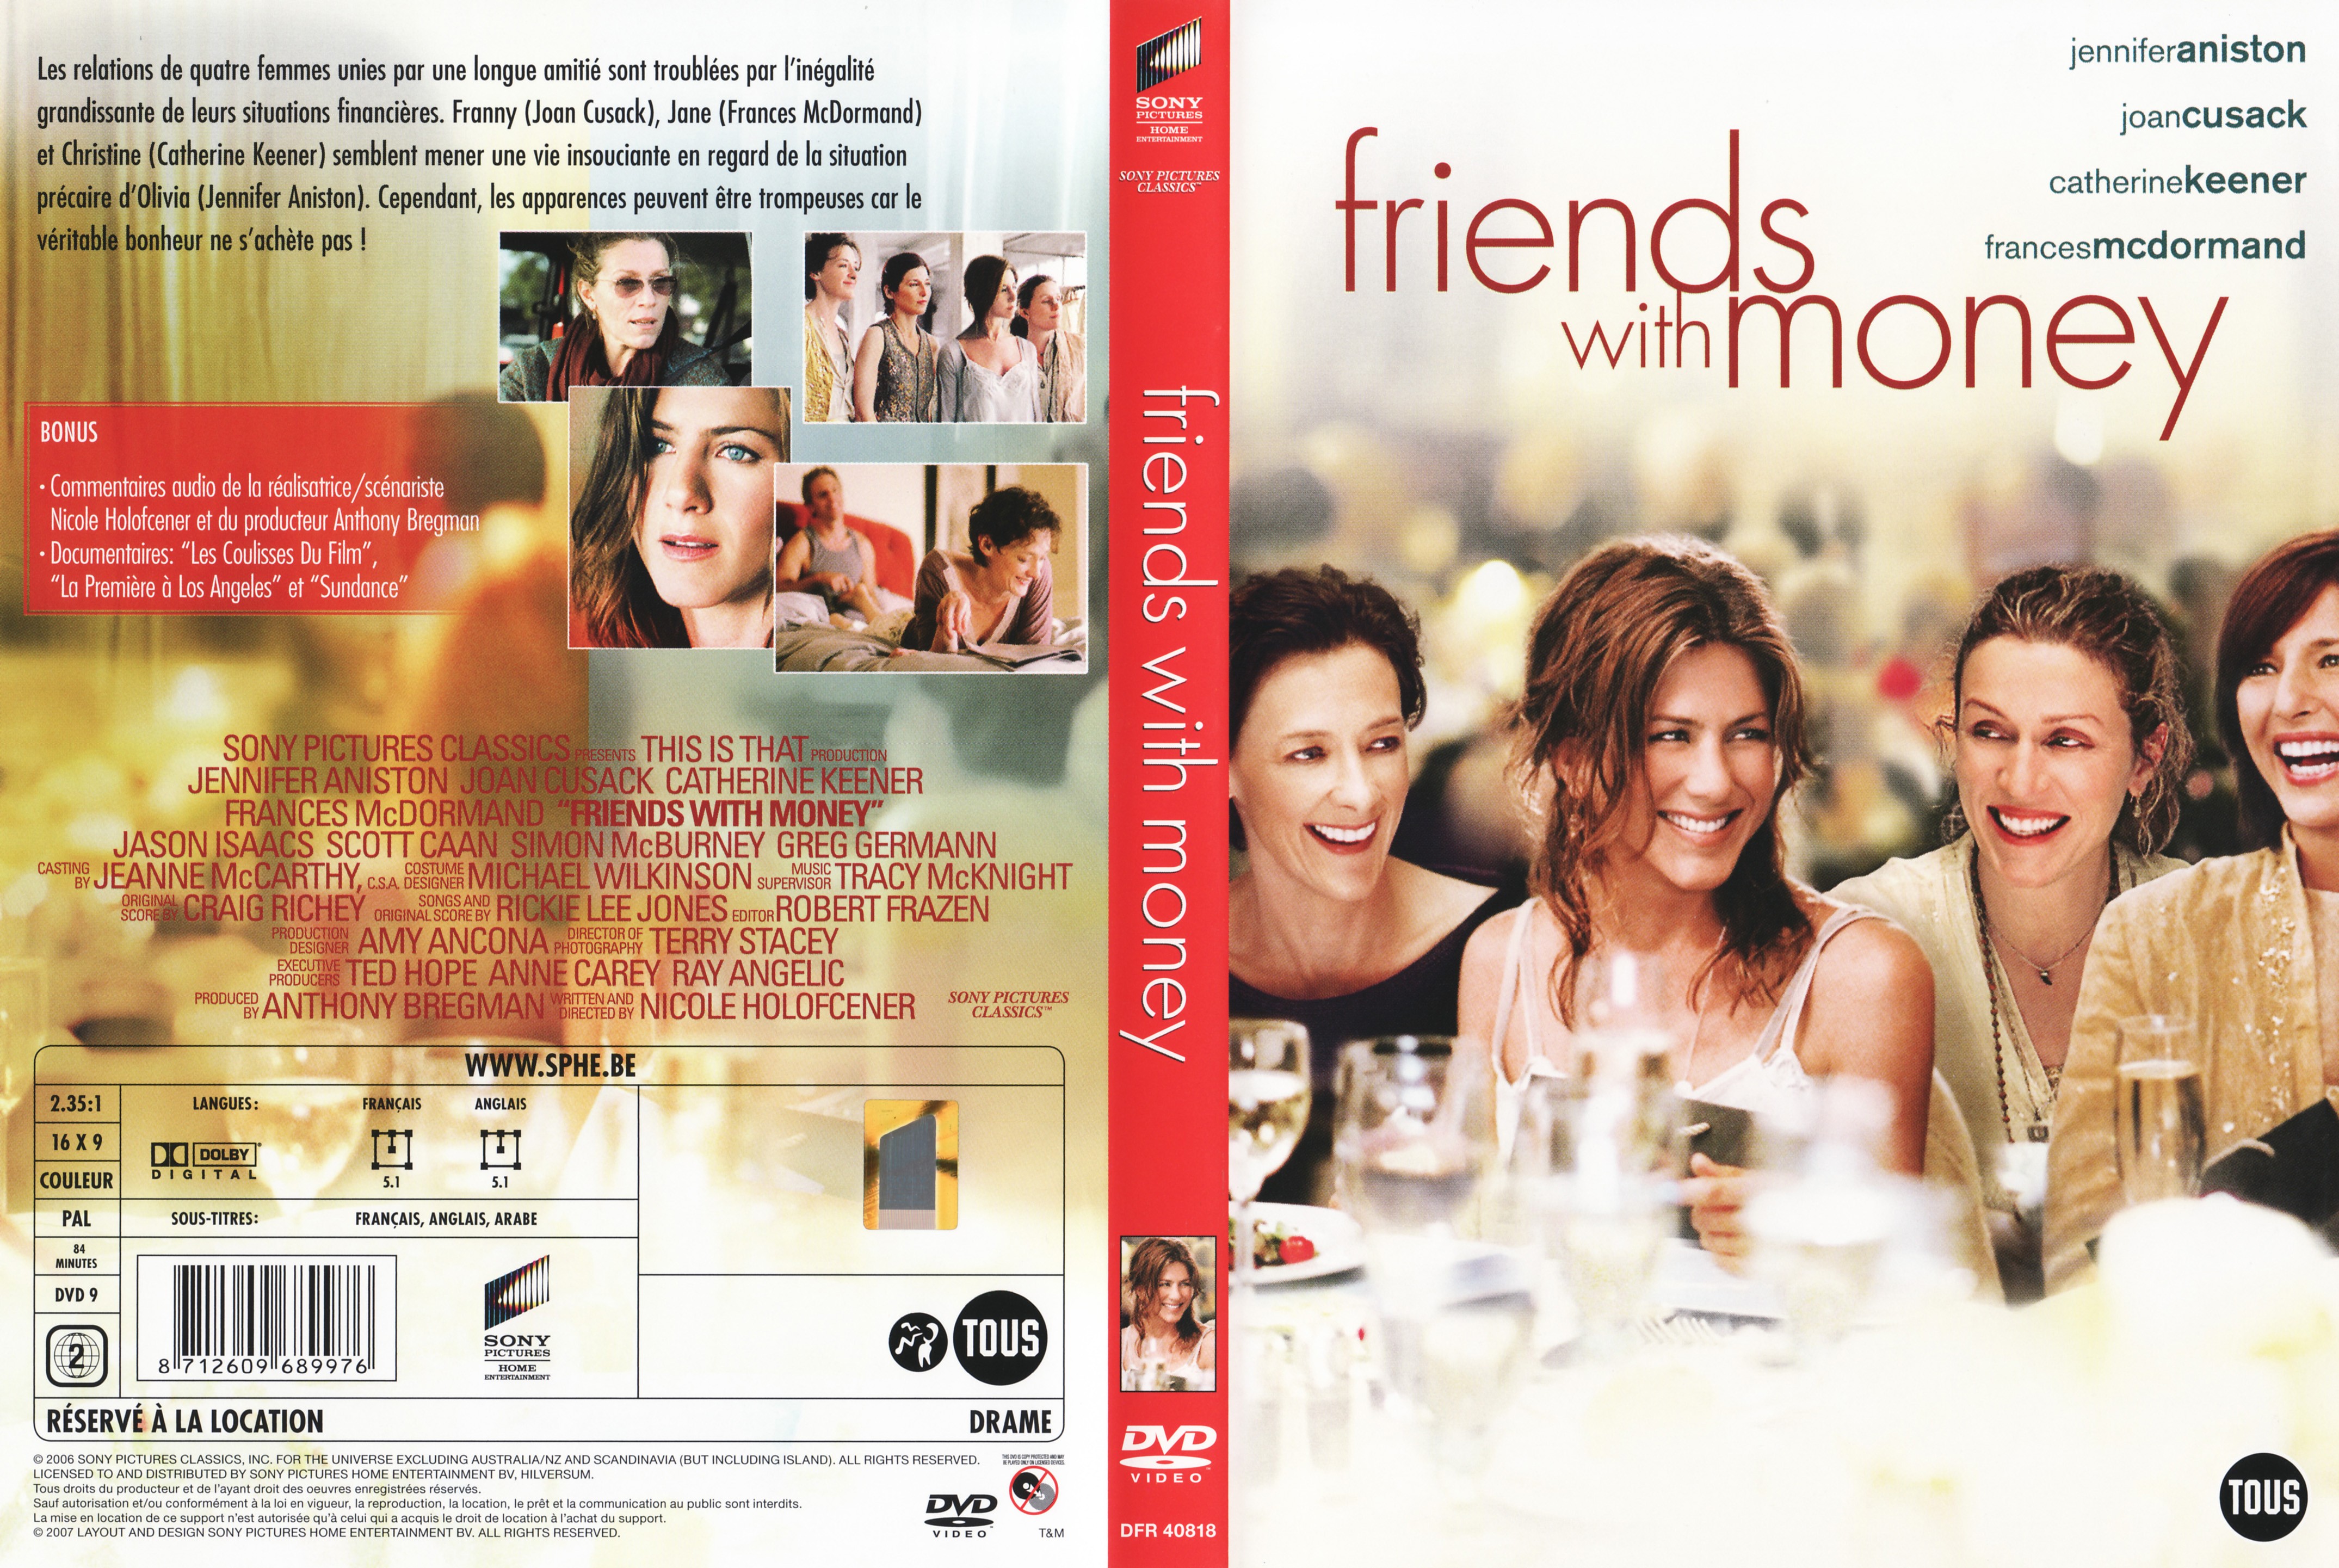 Jaquette DVD Friends with money